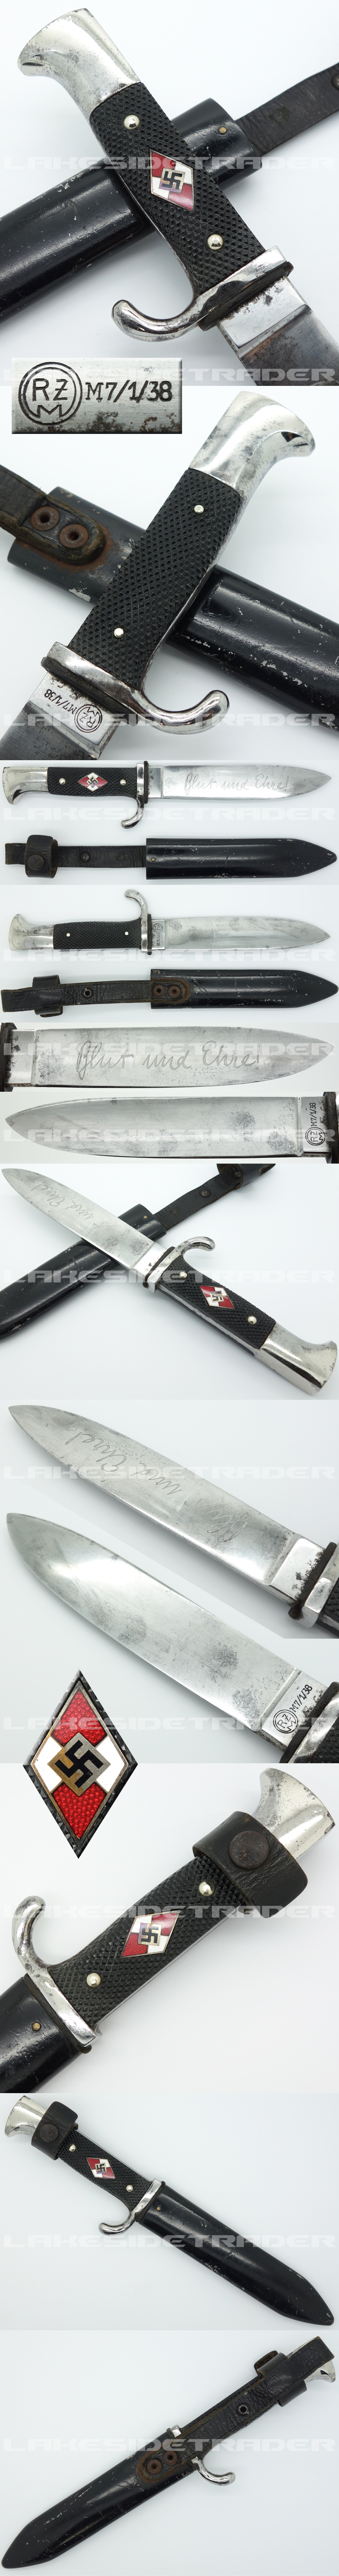 Transitional Hitler Youth Knife by RZM M7/1 1938